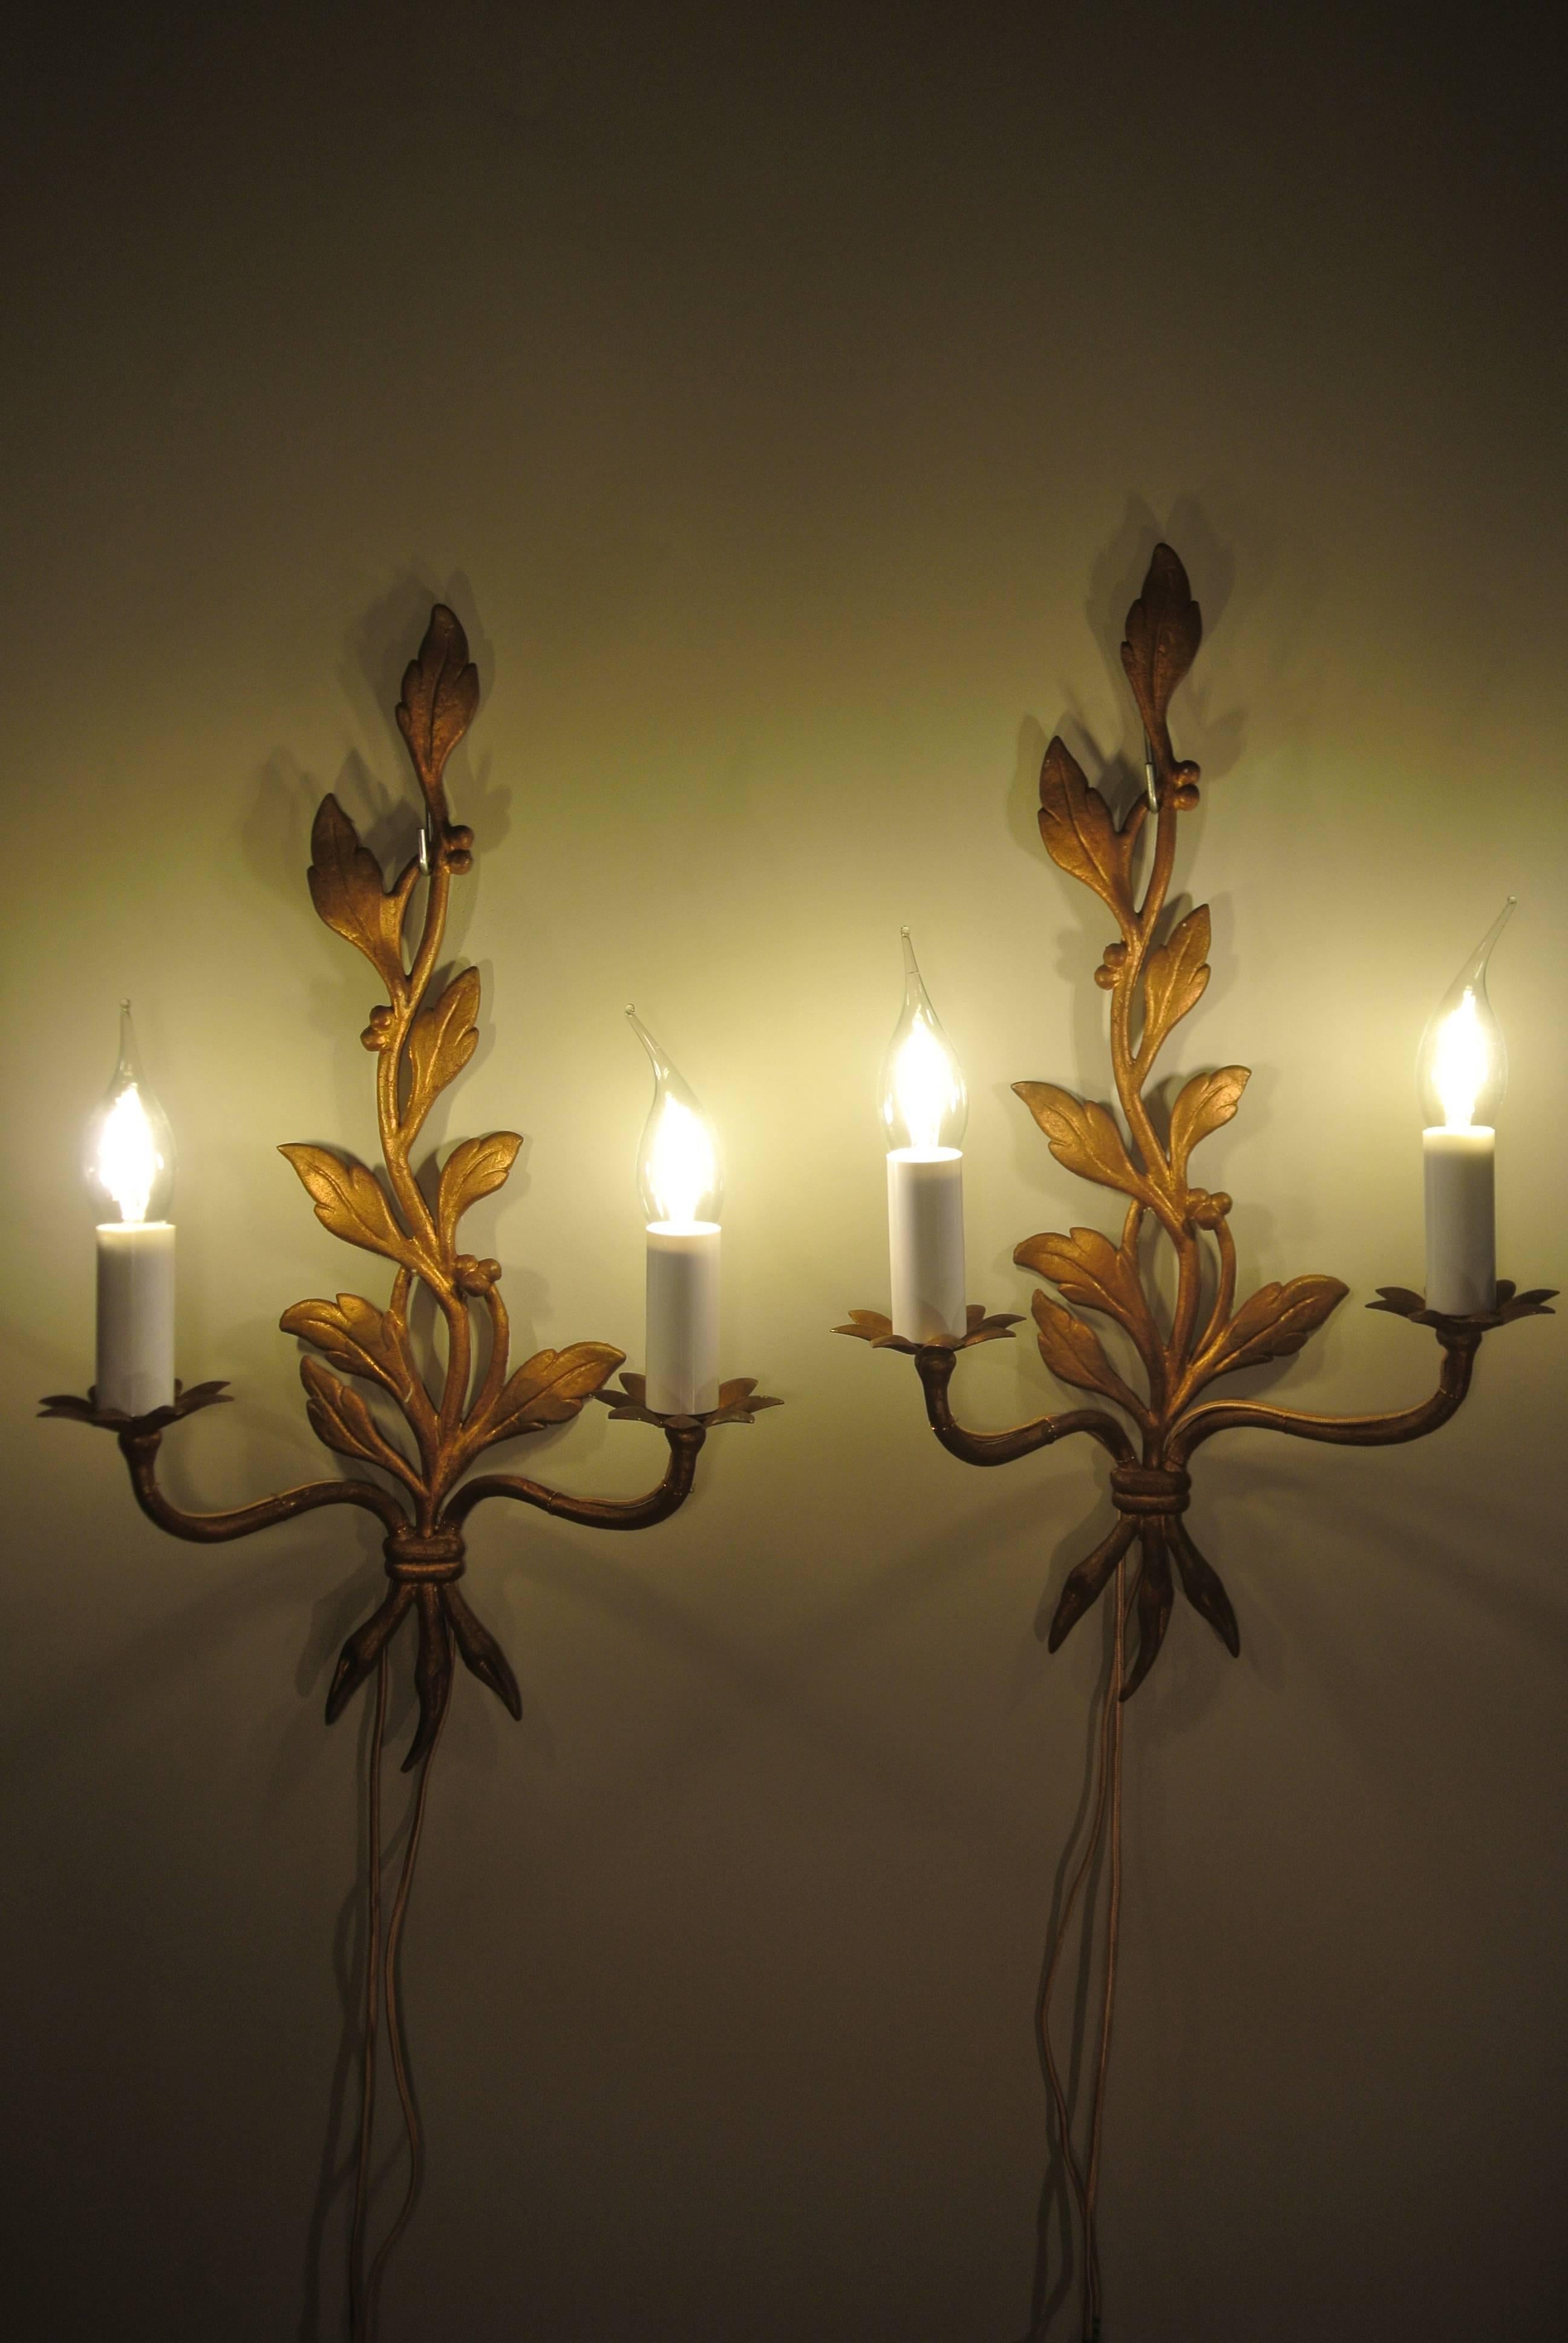 French Pair of Mid-Century Modern Gold Gilt Bronze Sconces in a Leaf Design, circa 1960